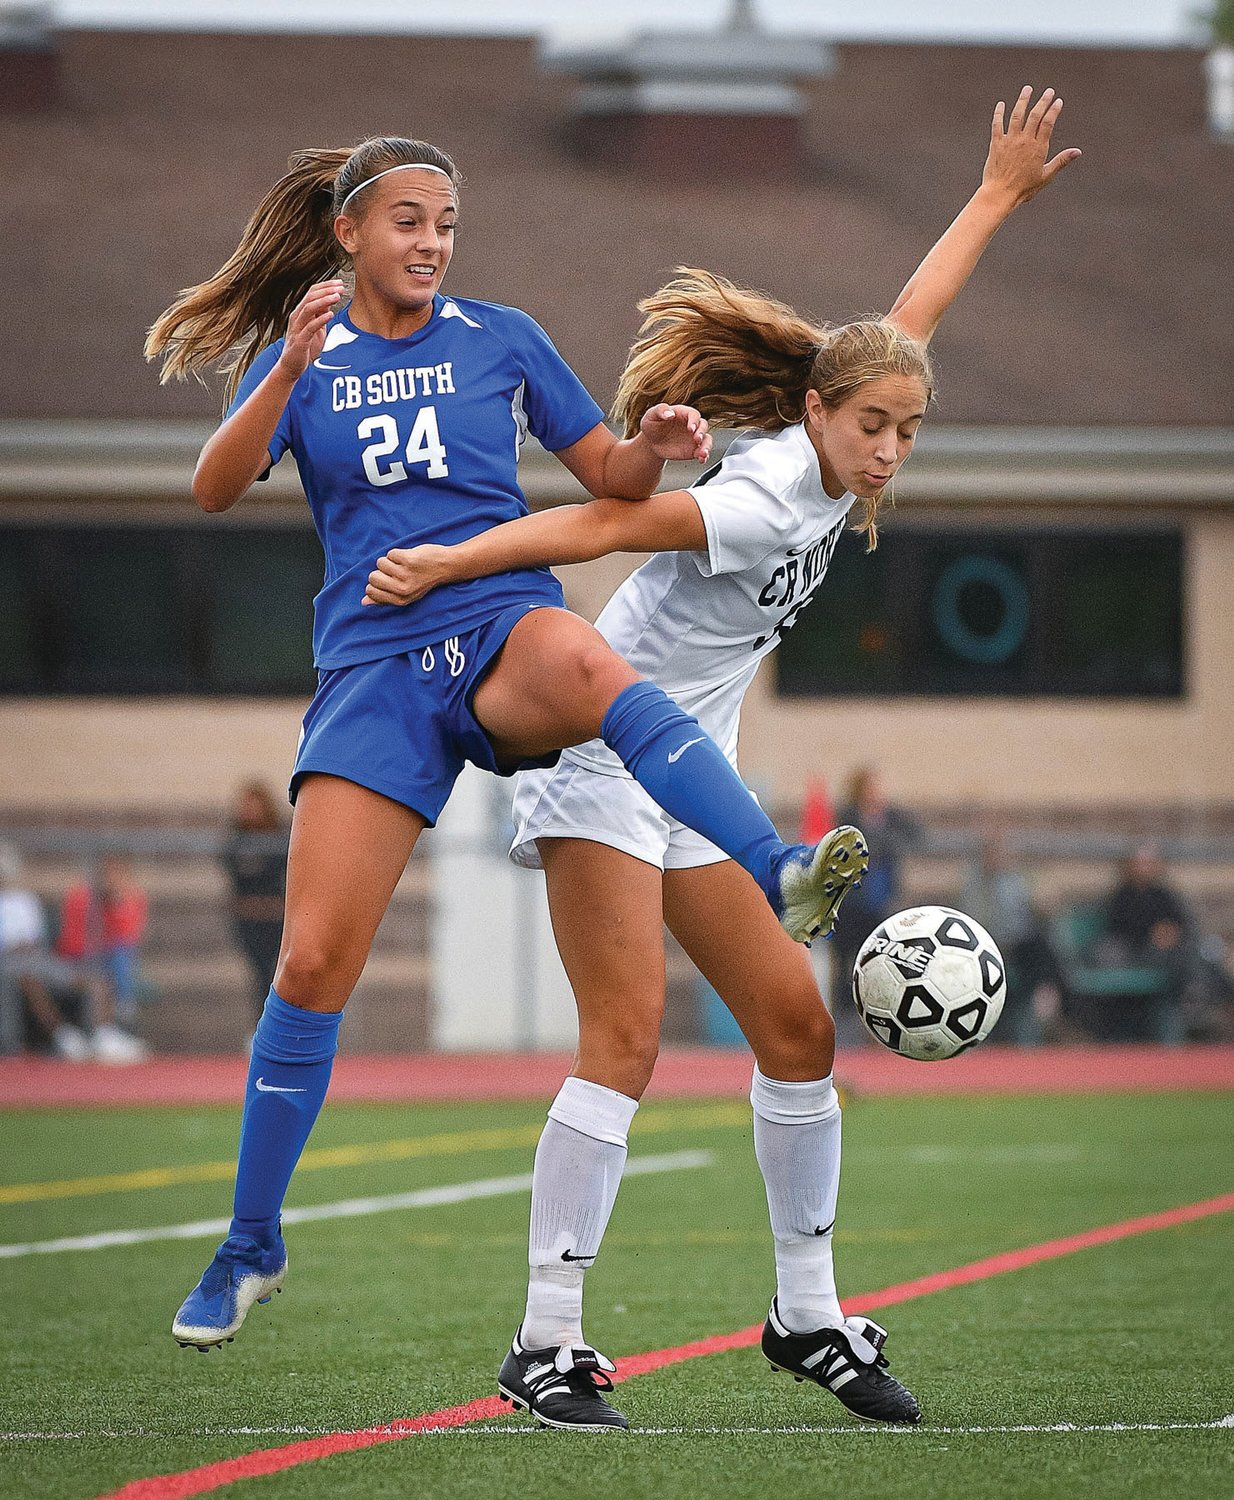 CB South’s Holly Joseph and CR North’s Mia Cairone battle for a loose ball.